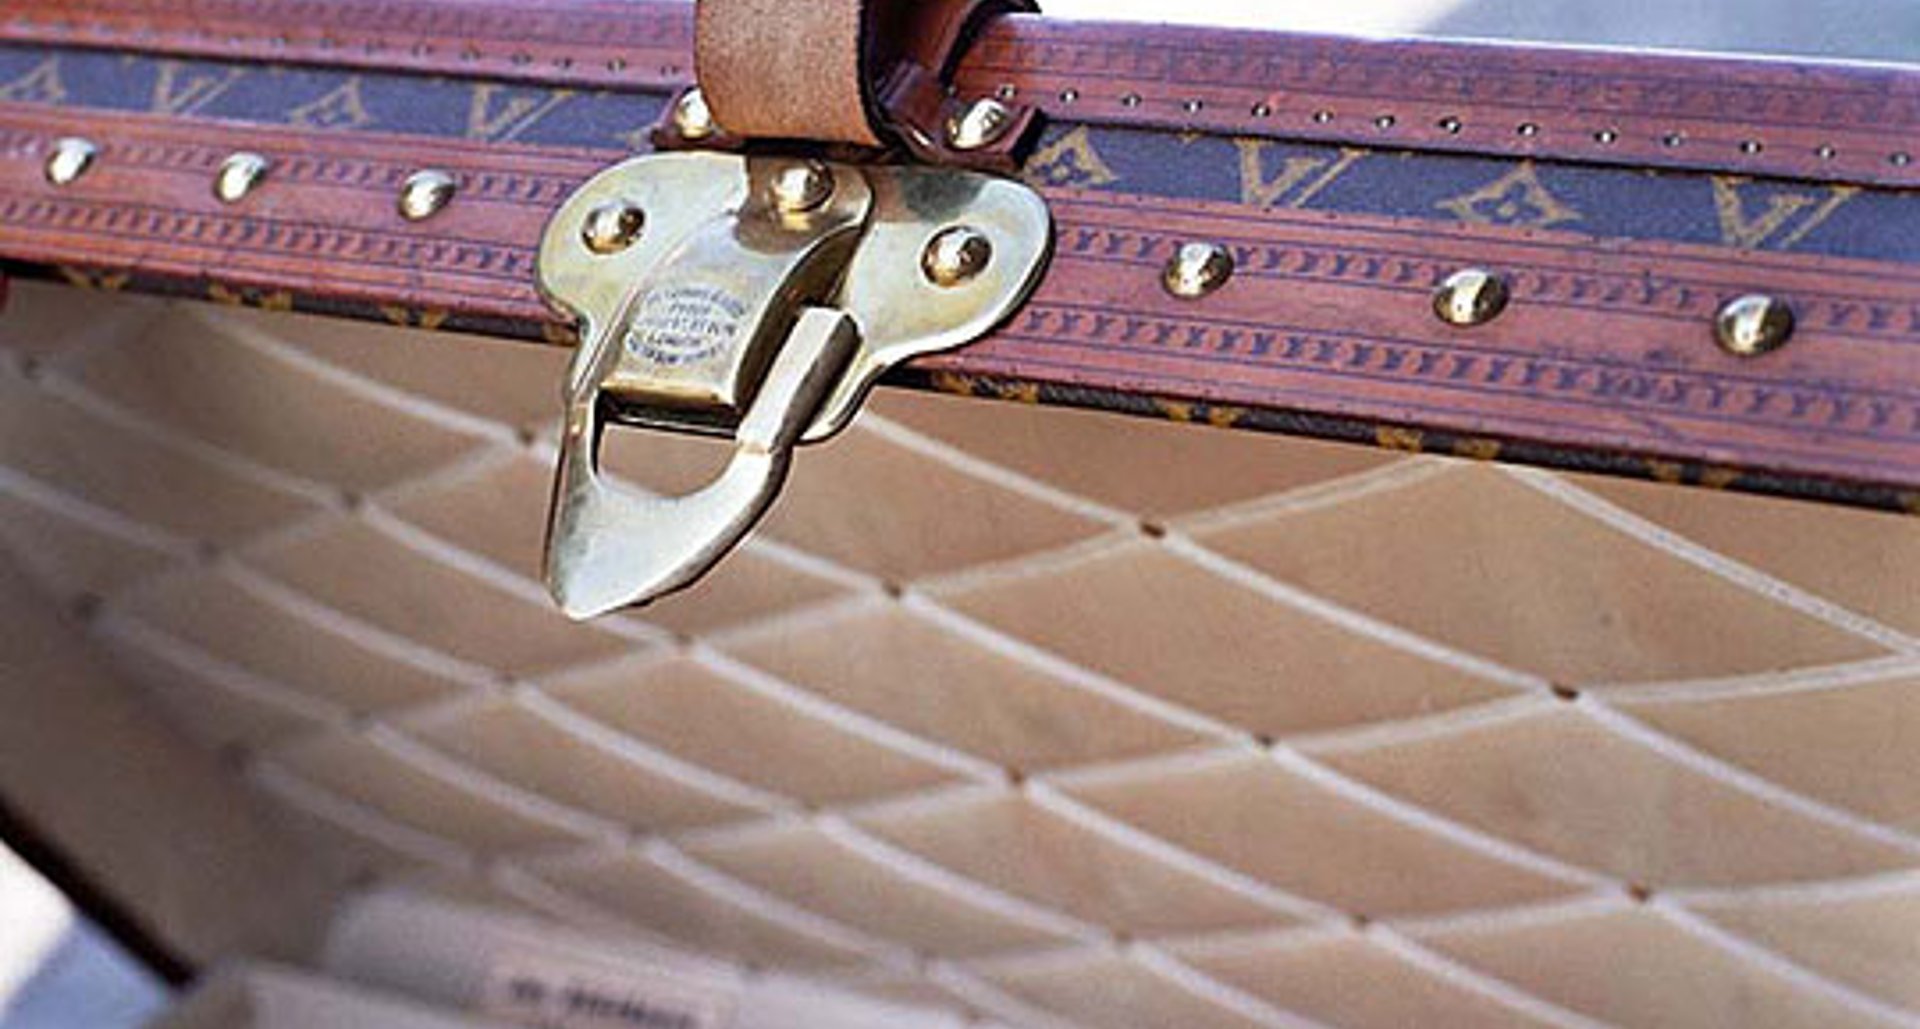 Sold at Auction: VINTAGE LOUIS VUITTON LUGGAGE SERIAL DATE CODE UNDER  BUCKLE STRAP